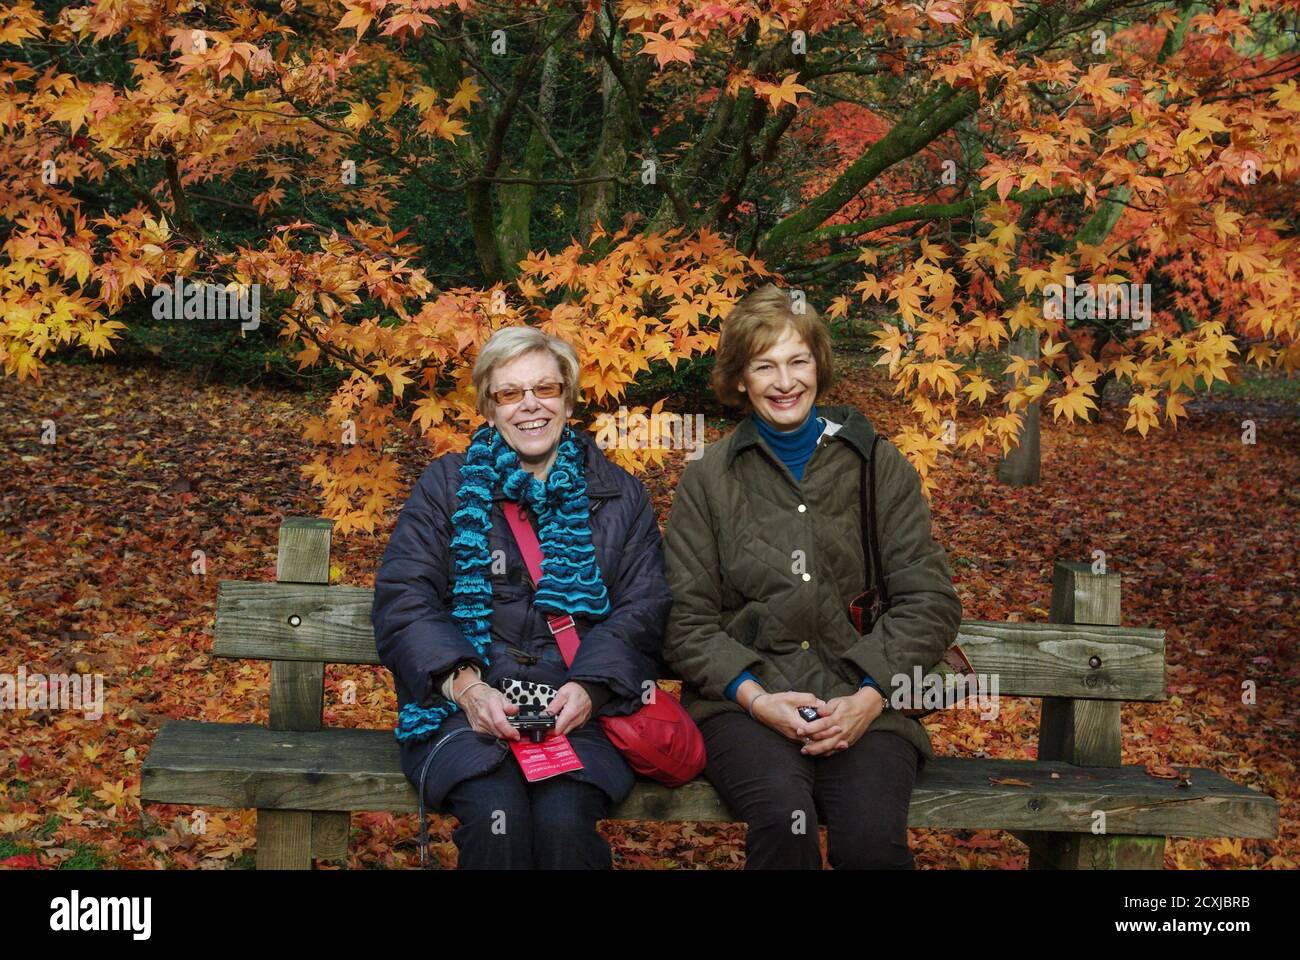 Two smiling senior women sitting on a wooden bench with a background of Autumn foliage, Westonbirt Arboretum, Gloucestershire, UK Stock Photo